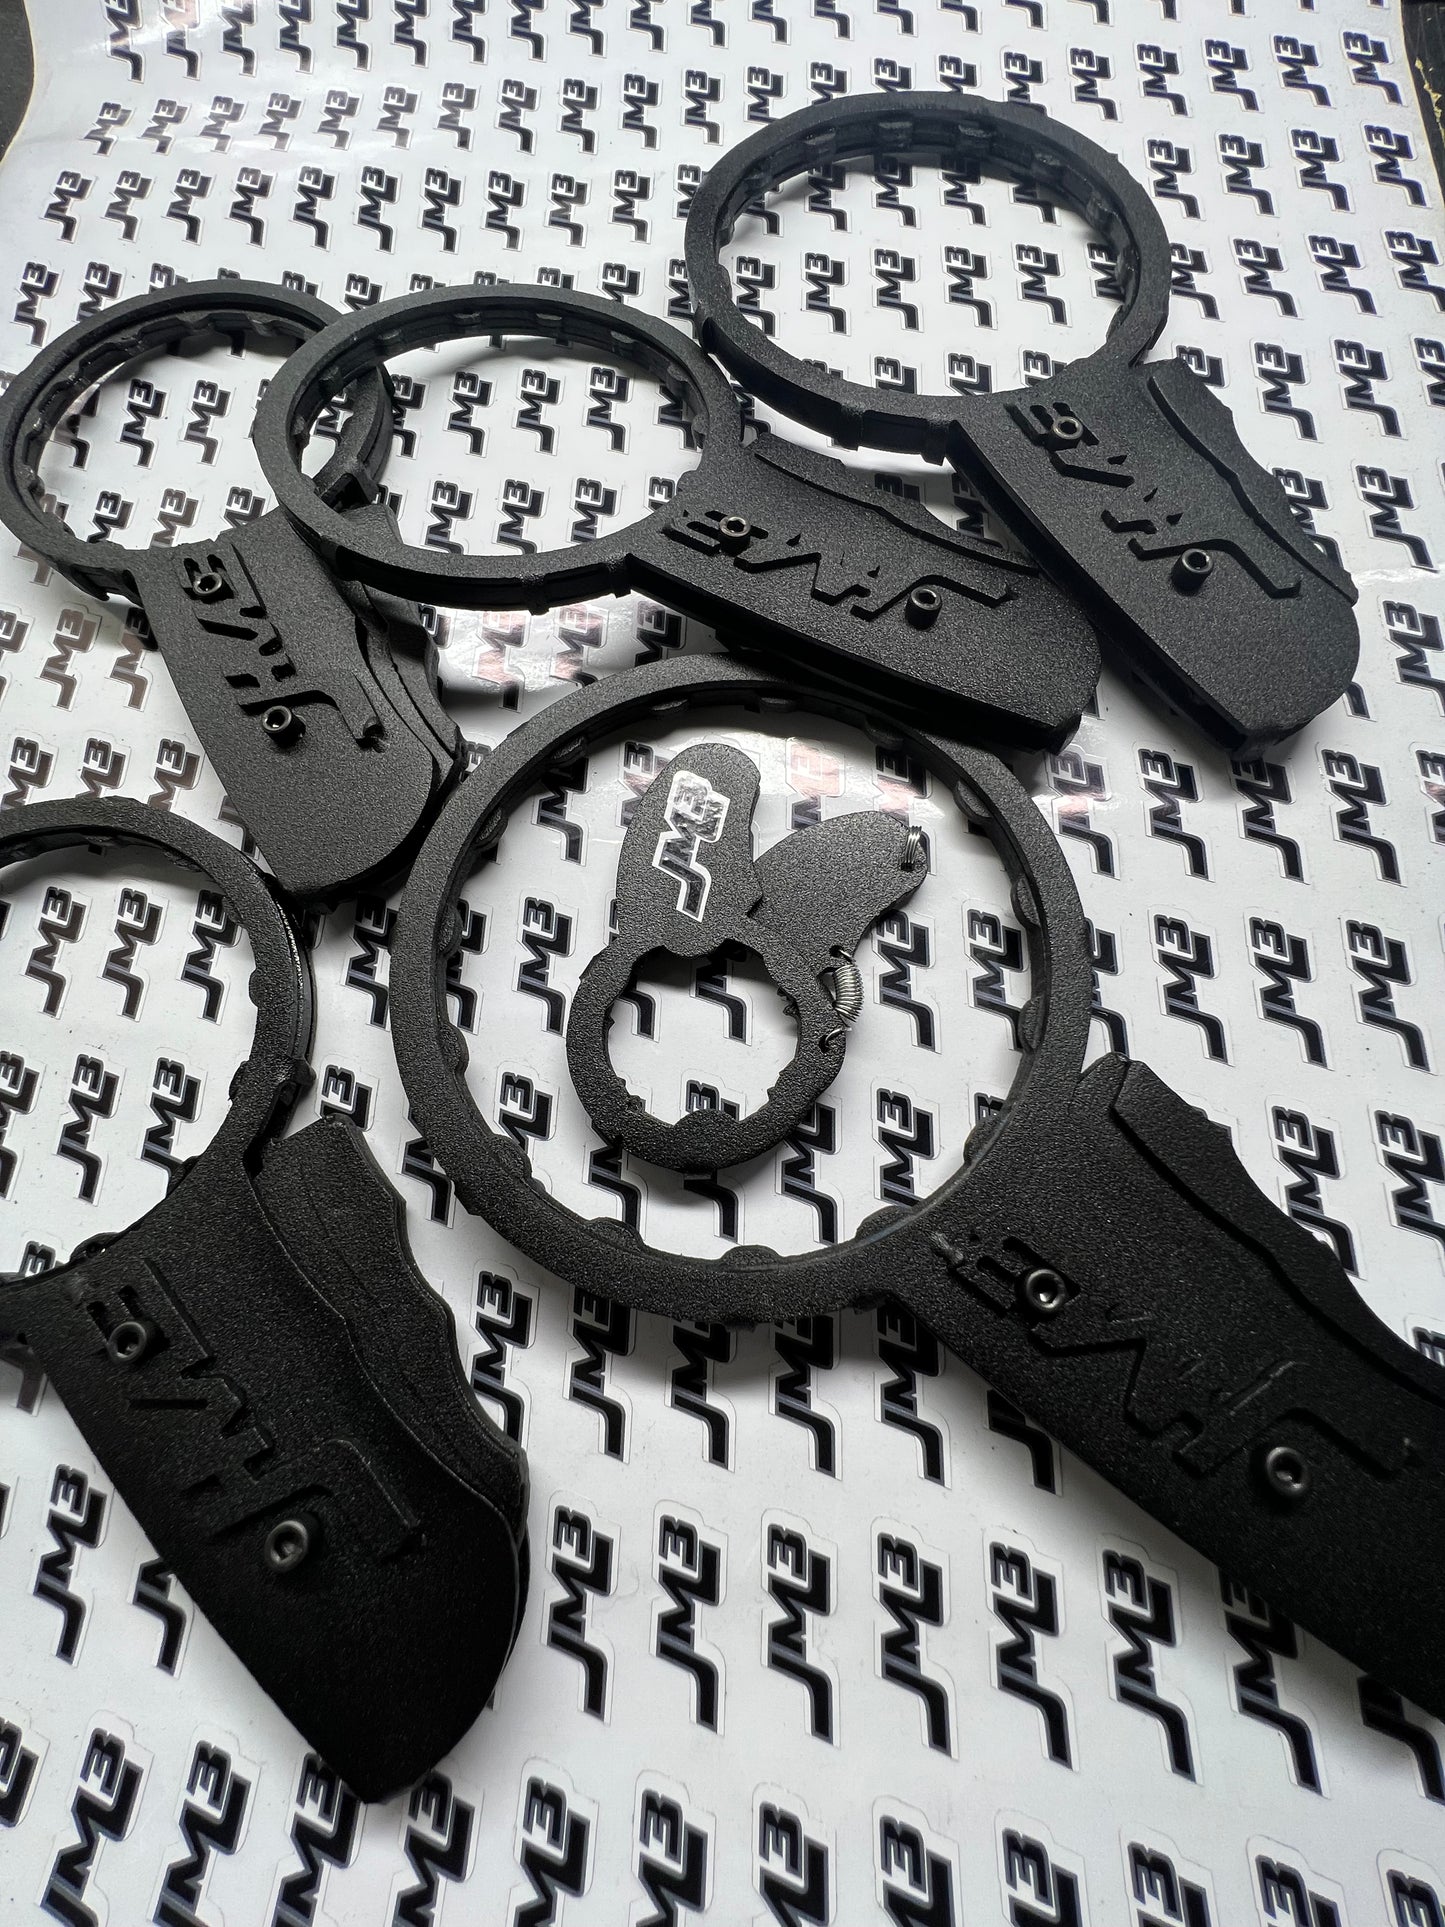 GEN 3 *STANDARD Set of 5 Wrenches * Product Unveiled at SEMA 23!!! JM3 Free Floating Ratchet